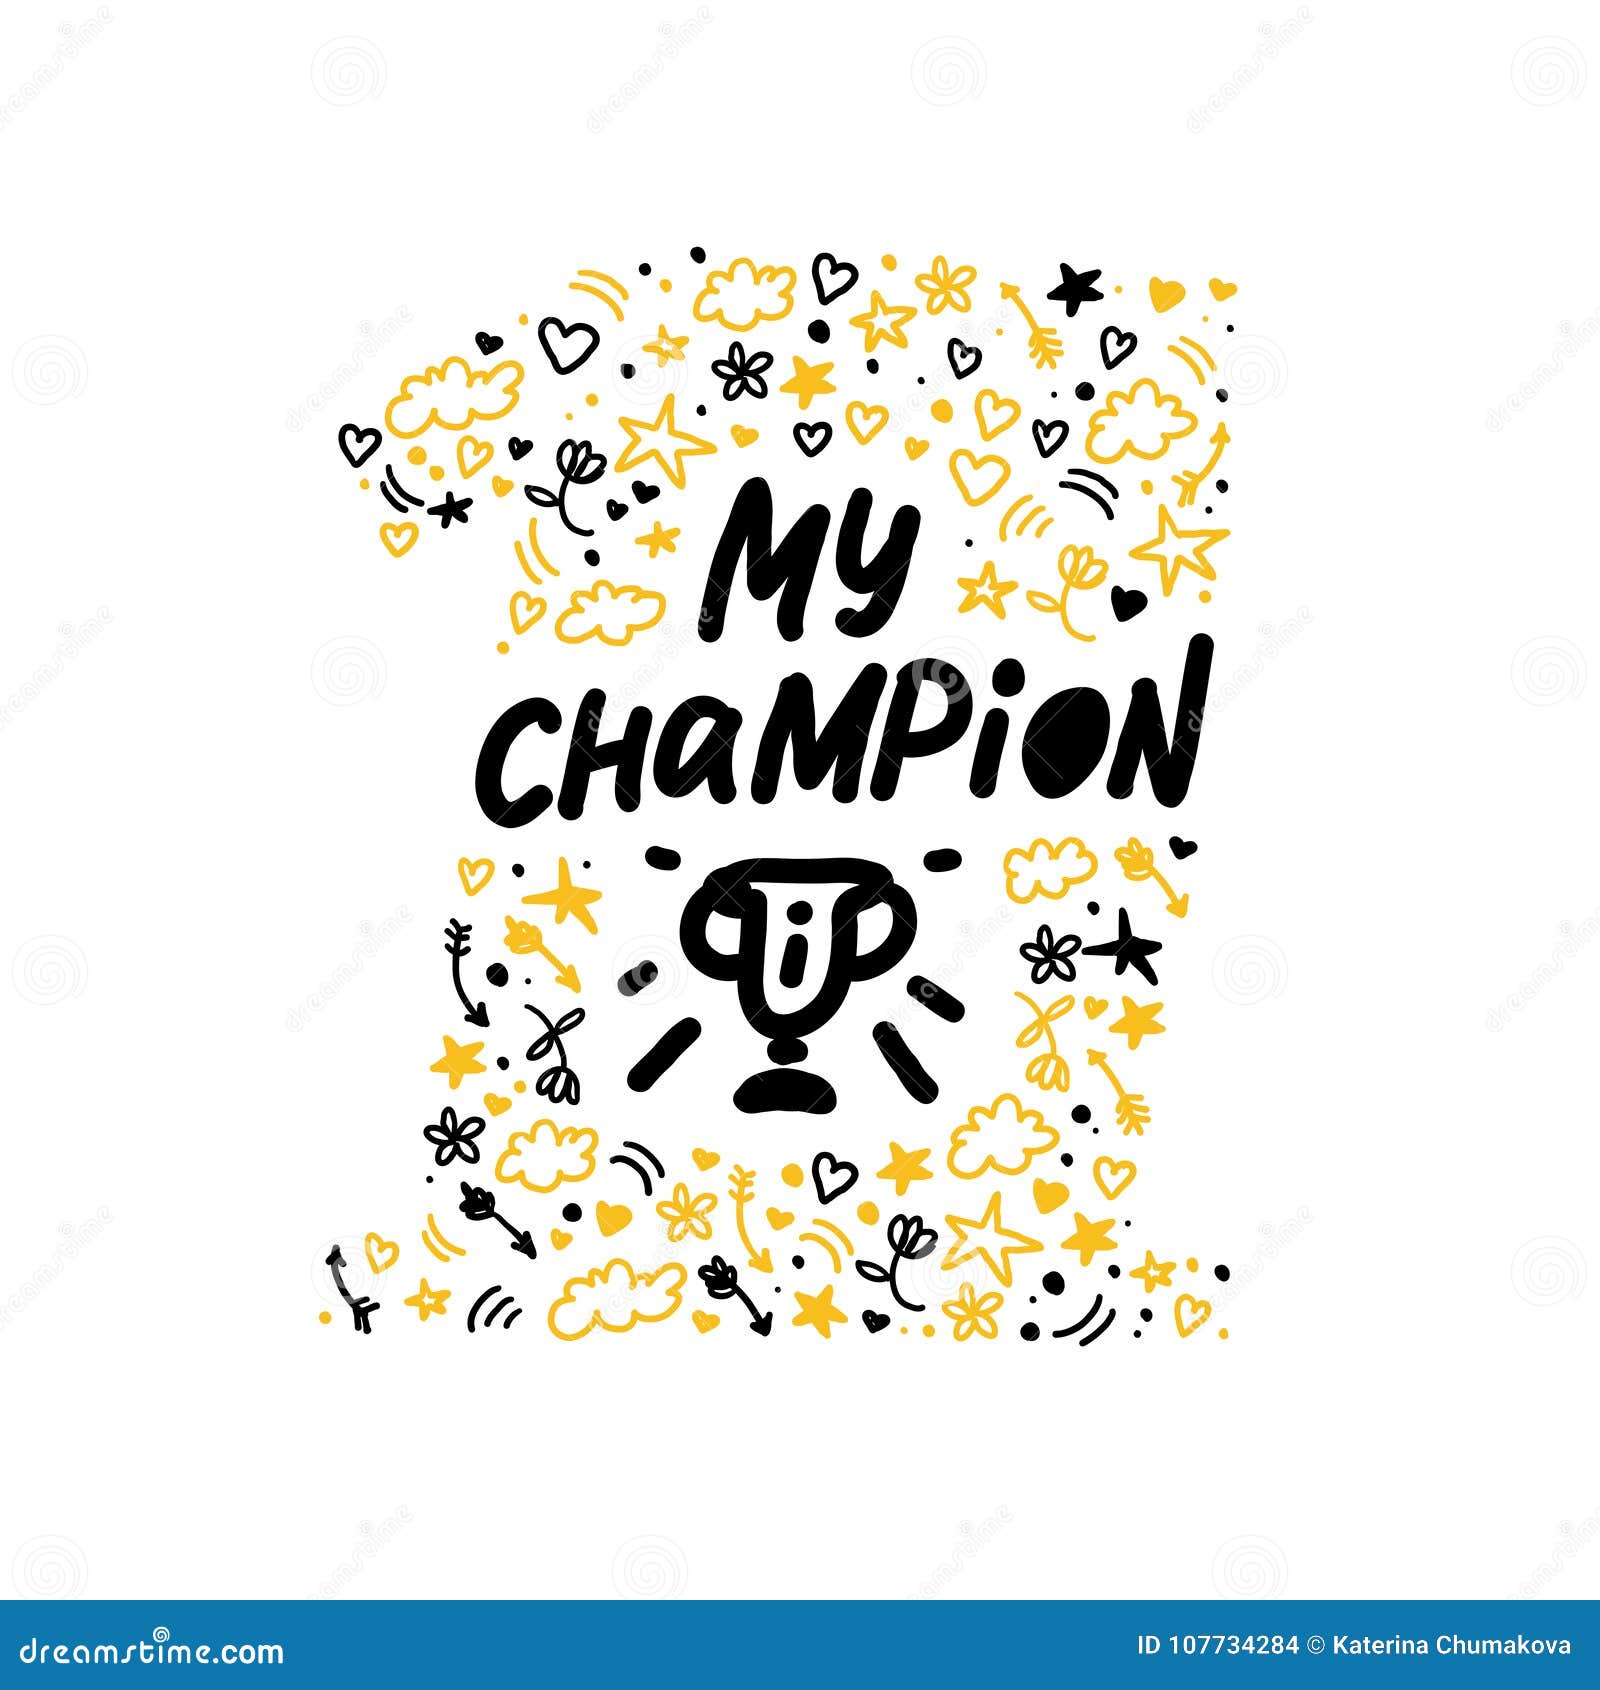 Vector Hand Made Lettering Love QuoteYou My Champion and Decor Elements and Pattern Isolated on White Background. Stock Vector - Illustration graphic, champion: 107734284